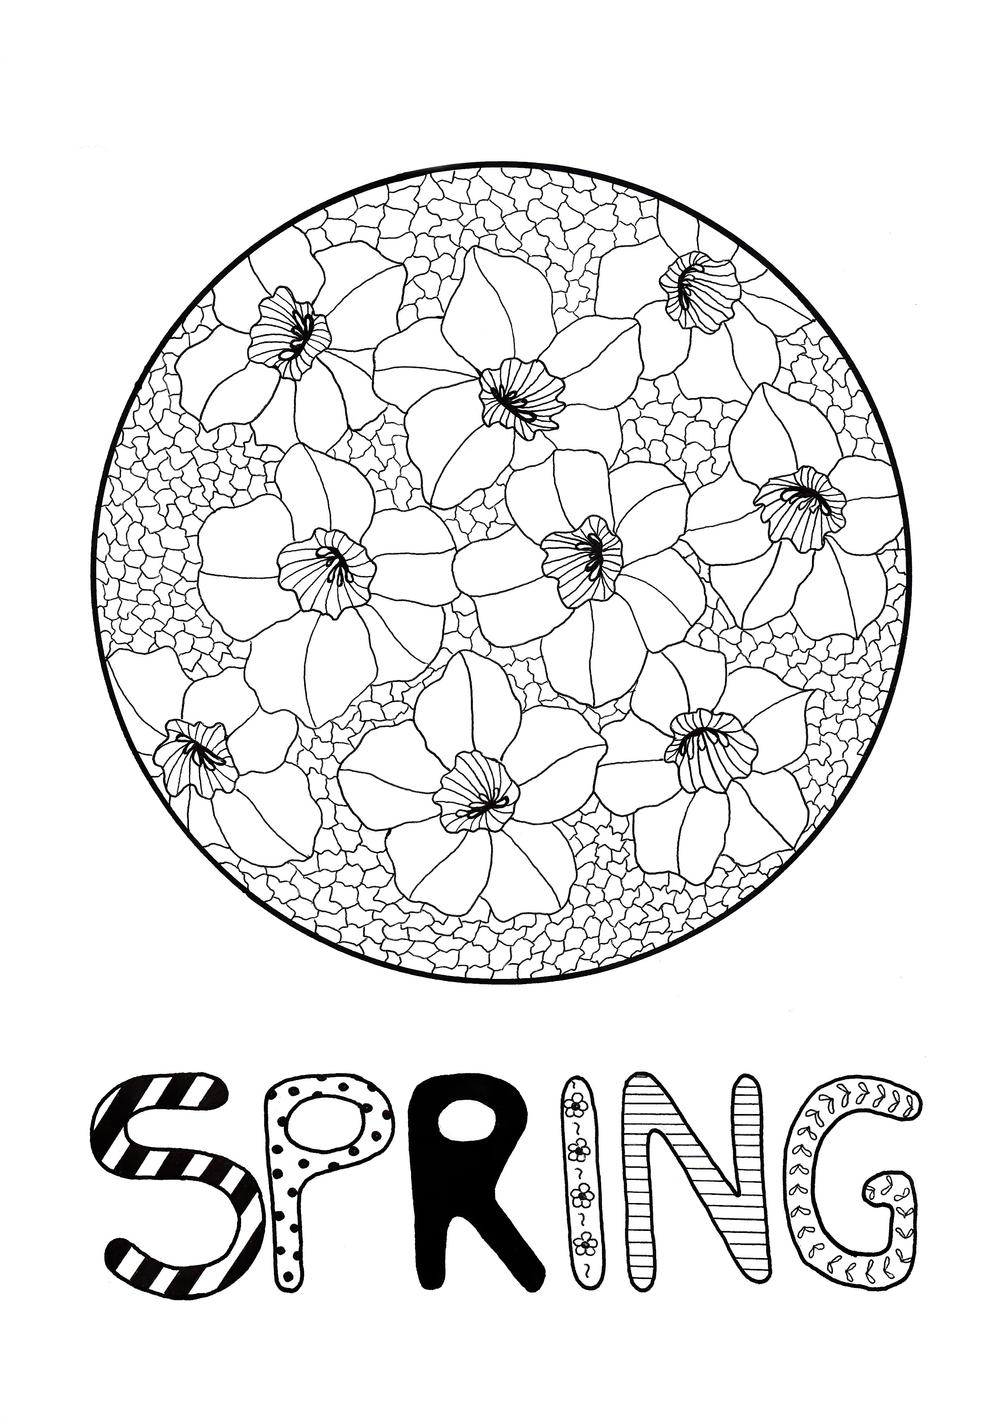 Download Daffodil Mosaic Adult Coloring Page | AllFreeHolidayCrafts.com